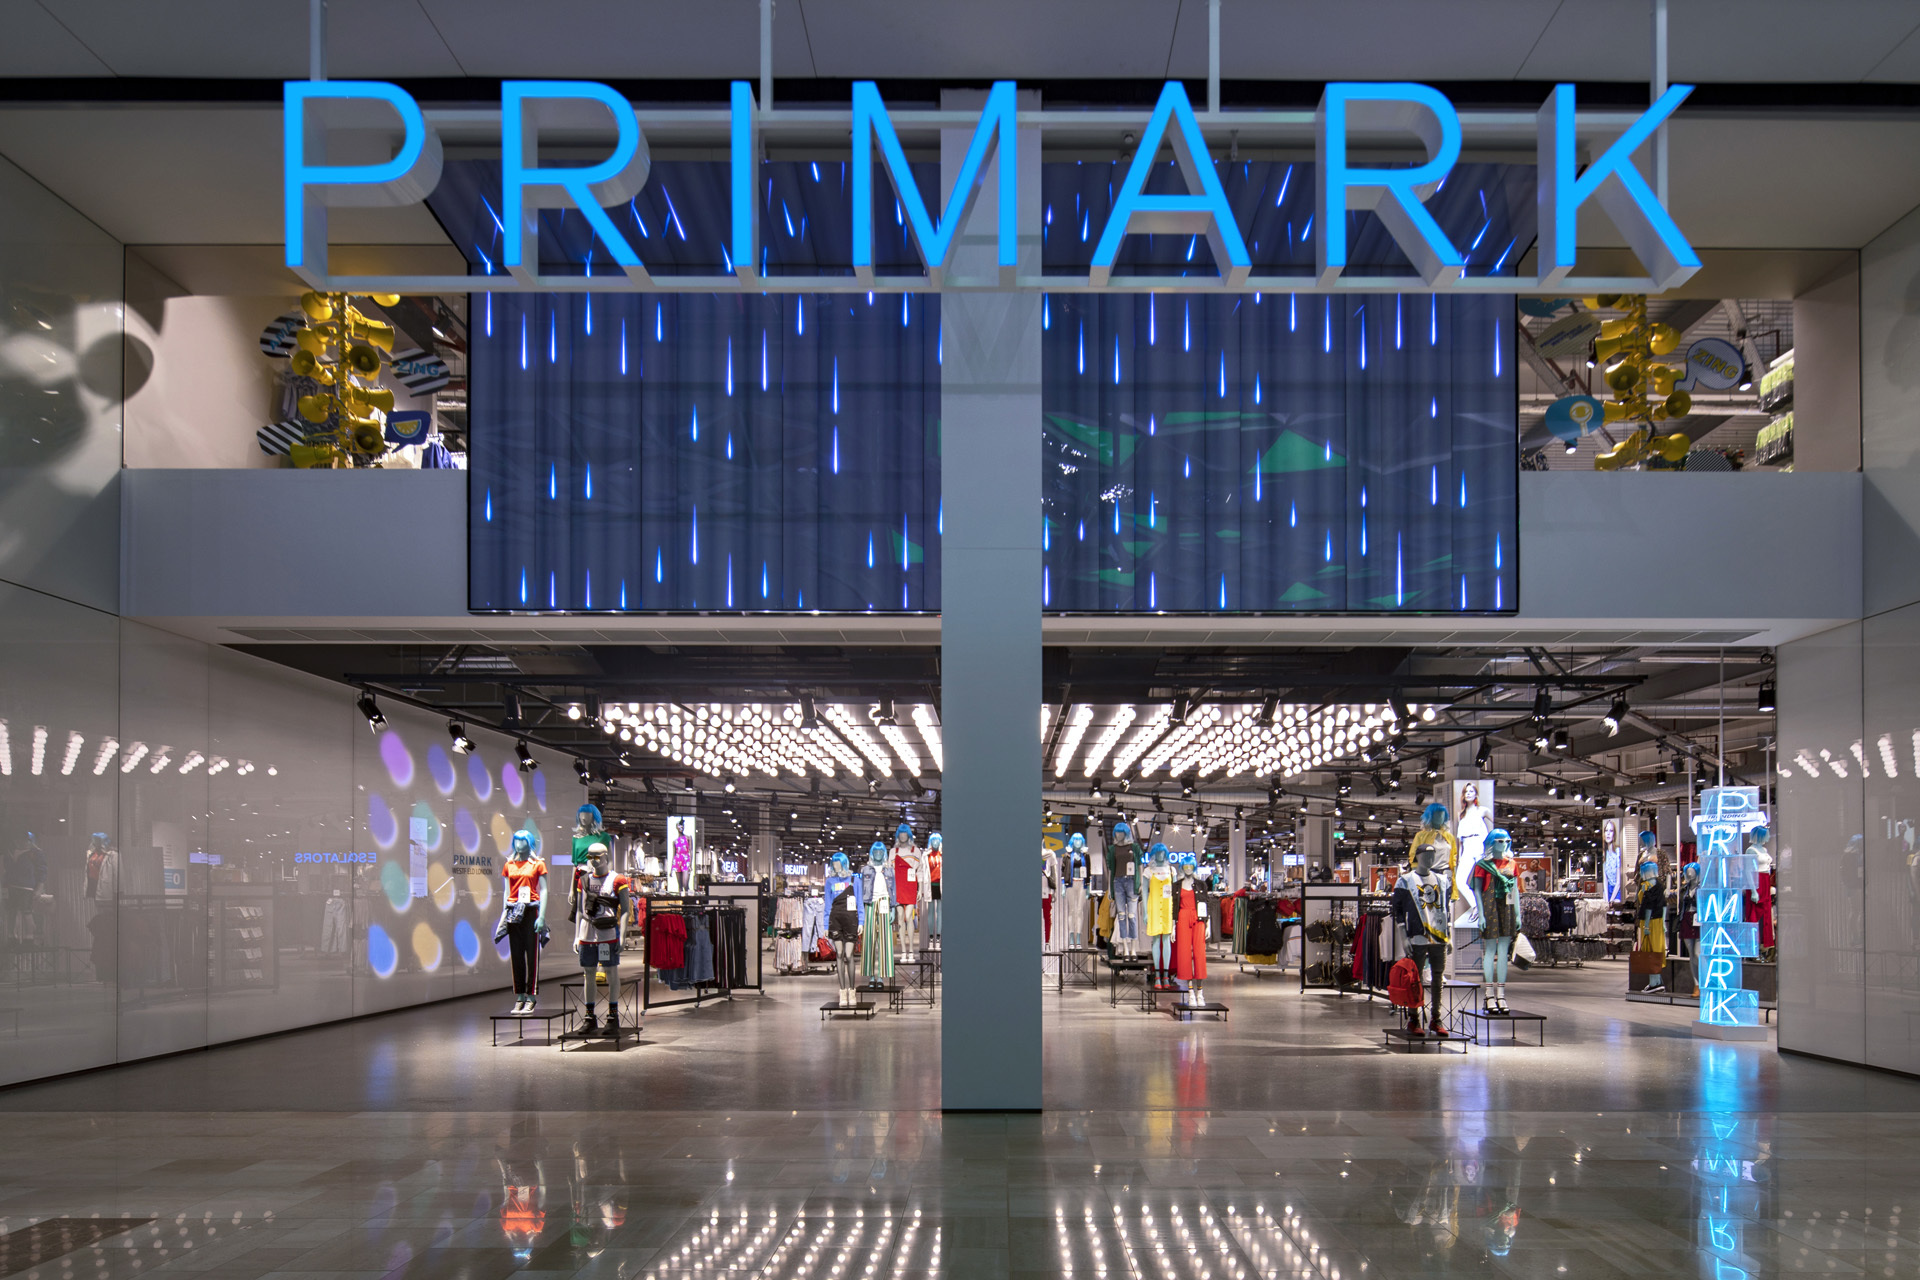 New wave of Primark contracts image